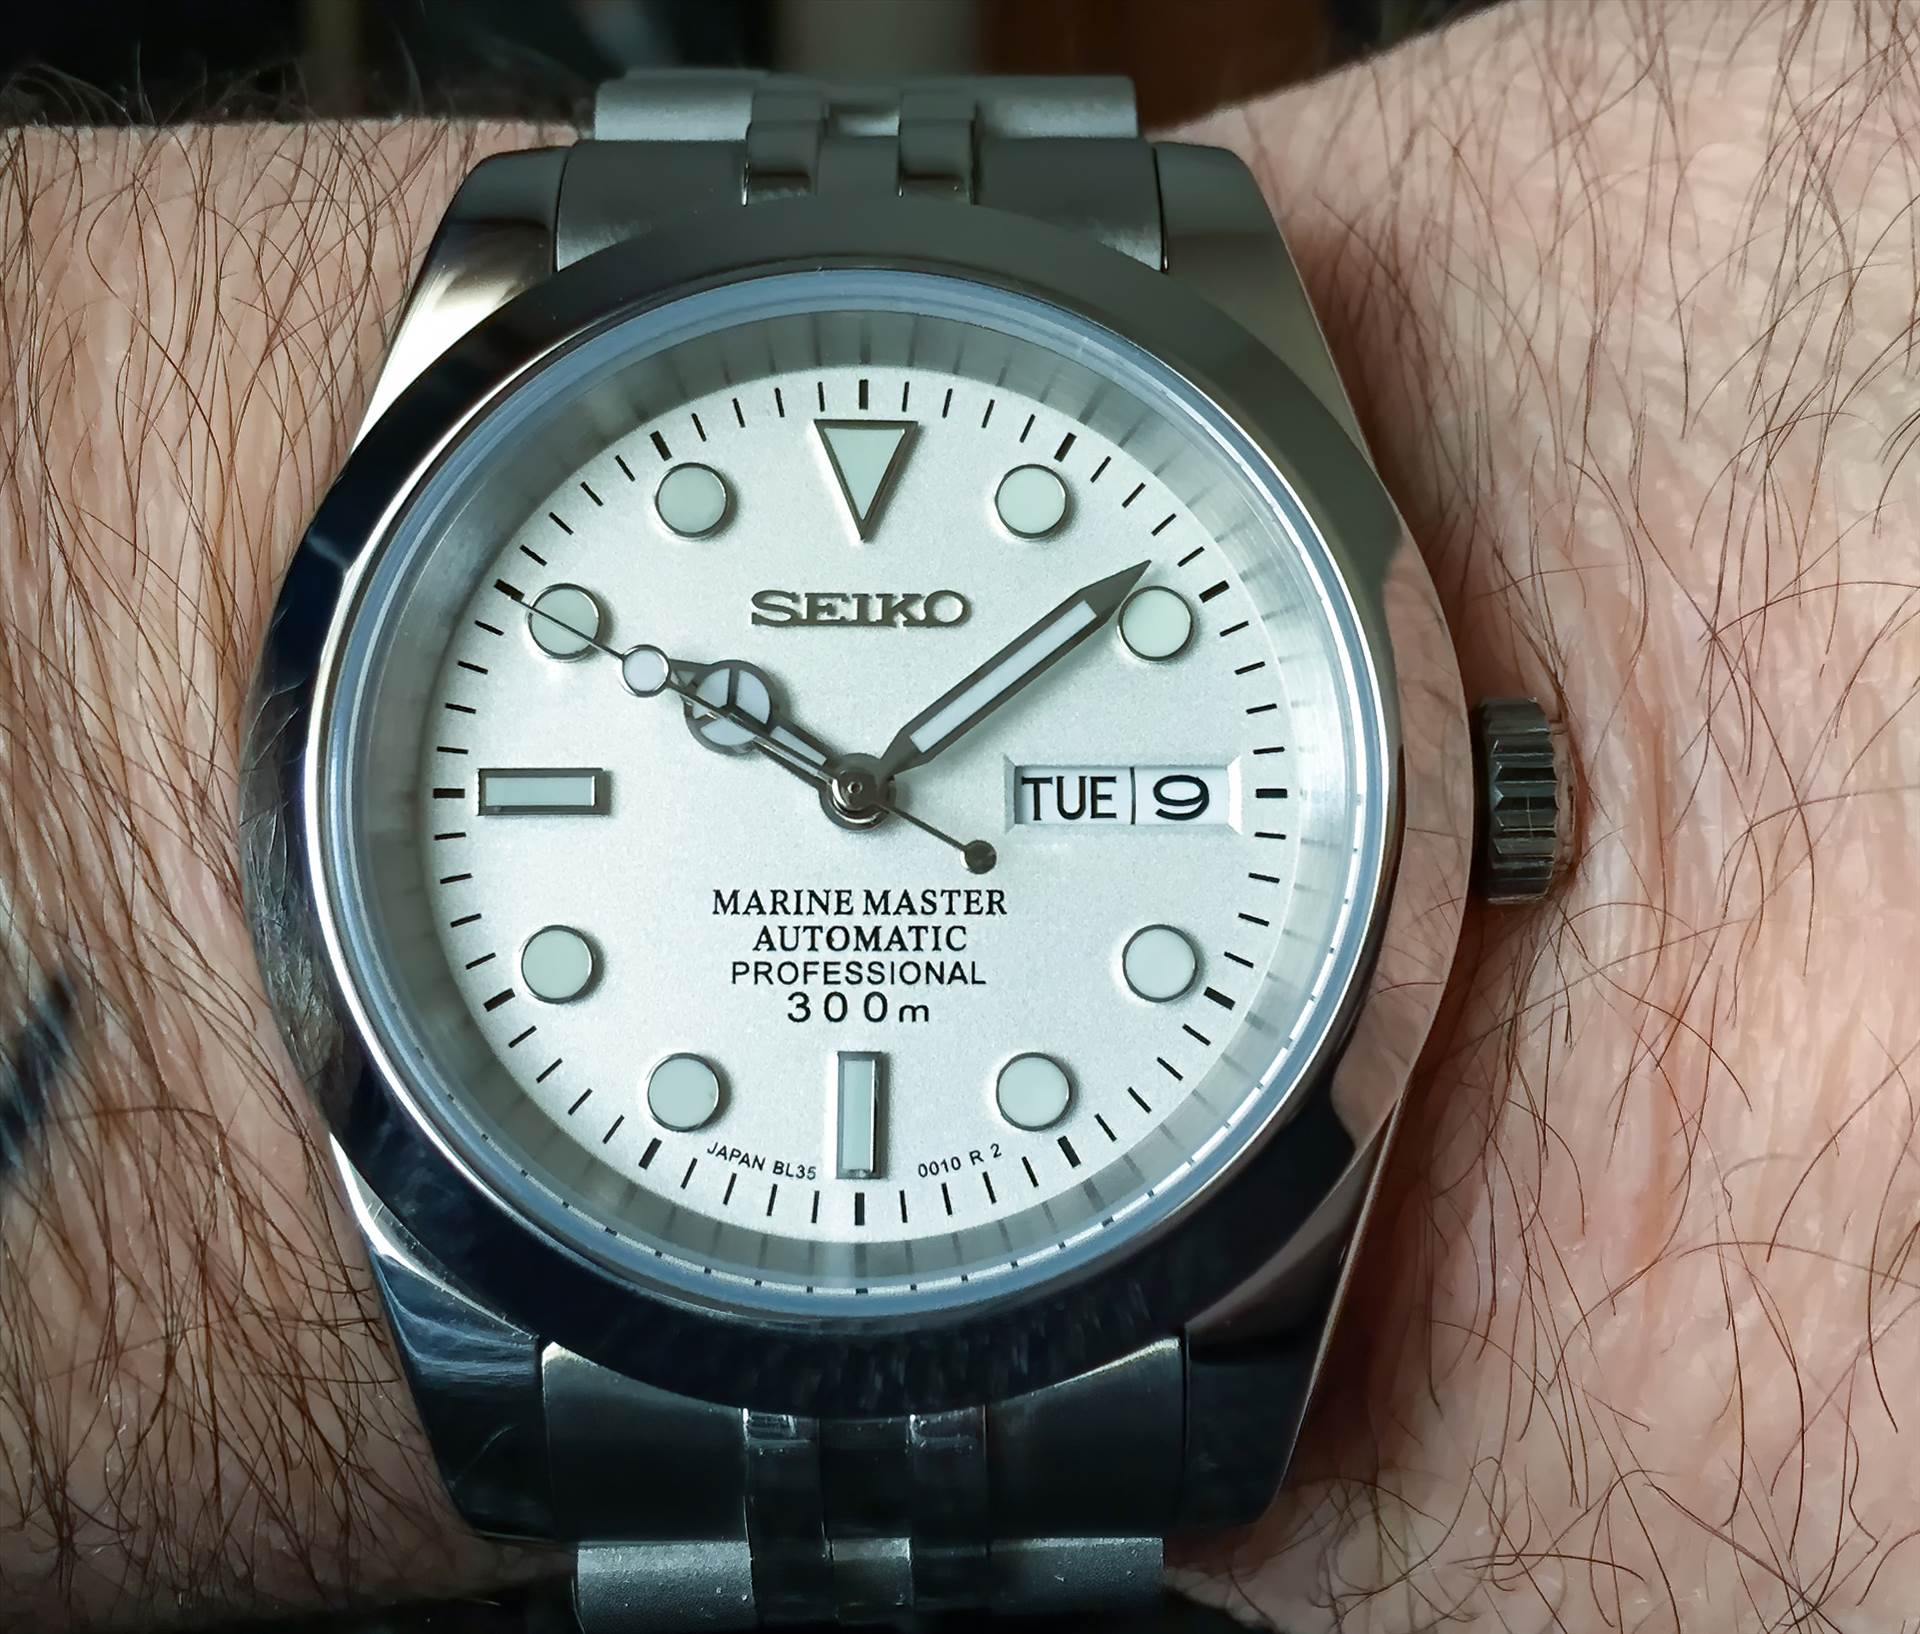 Seiko day-date build Seiko day-date homage build by johntorcasio